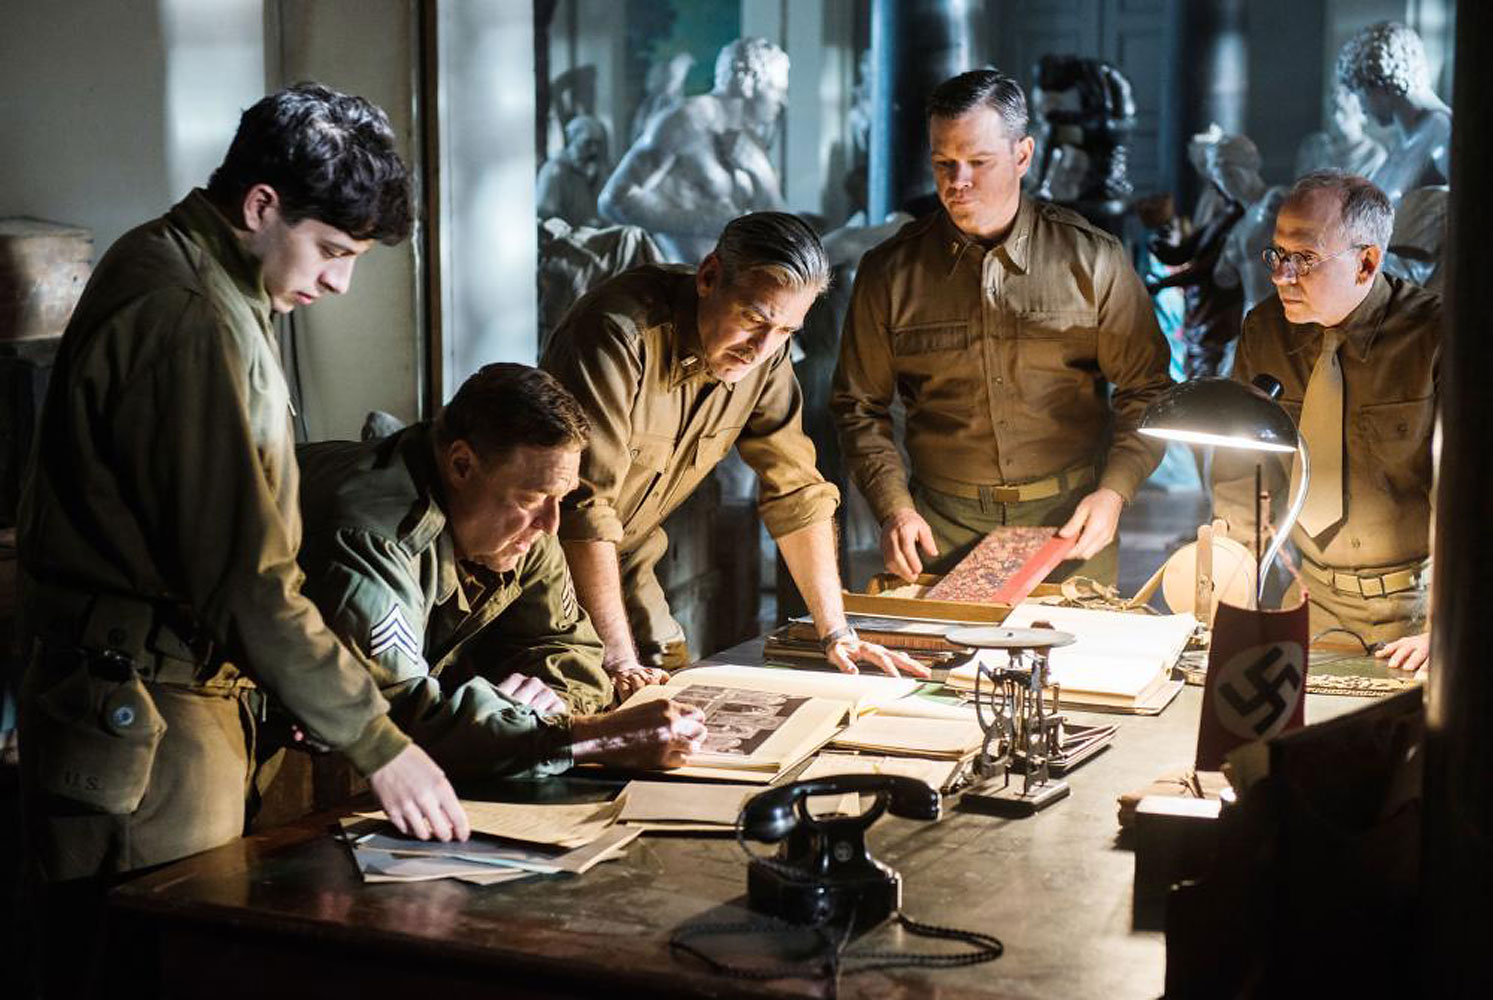 George Clooney’s newest film, Monuments Men, follows the exploits of an Allied platoon of seven “Monuments Men” who enter Germany during the end of World War II to rescue art stolen by the Nazis.